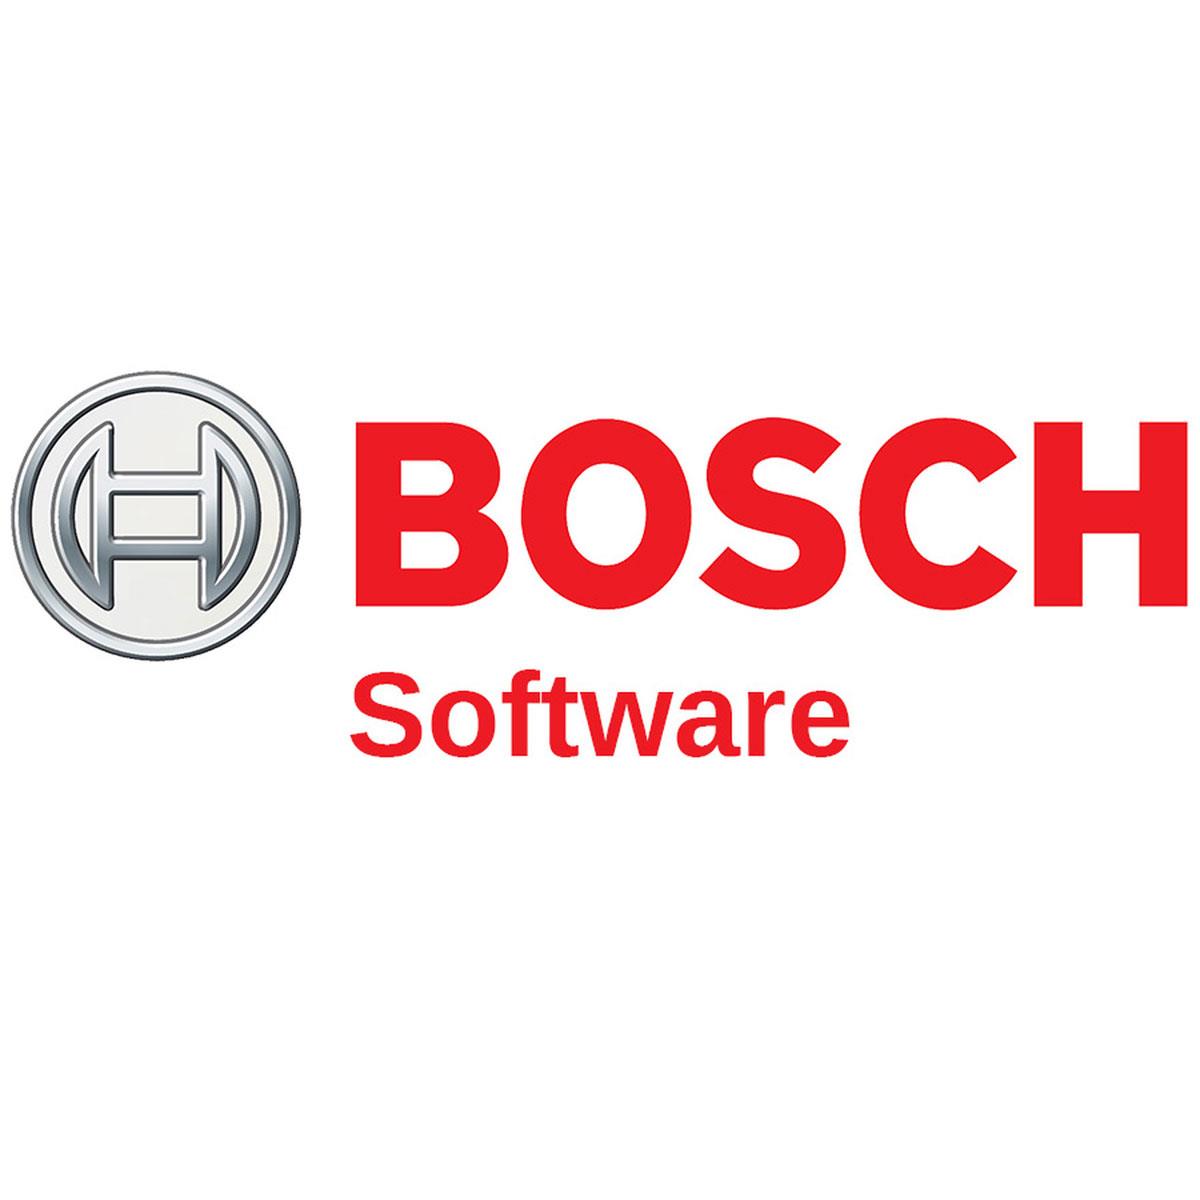 Image of Bosch BVMS Video Management System